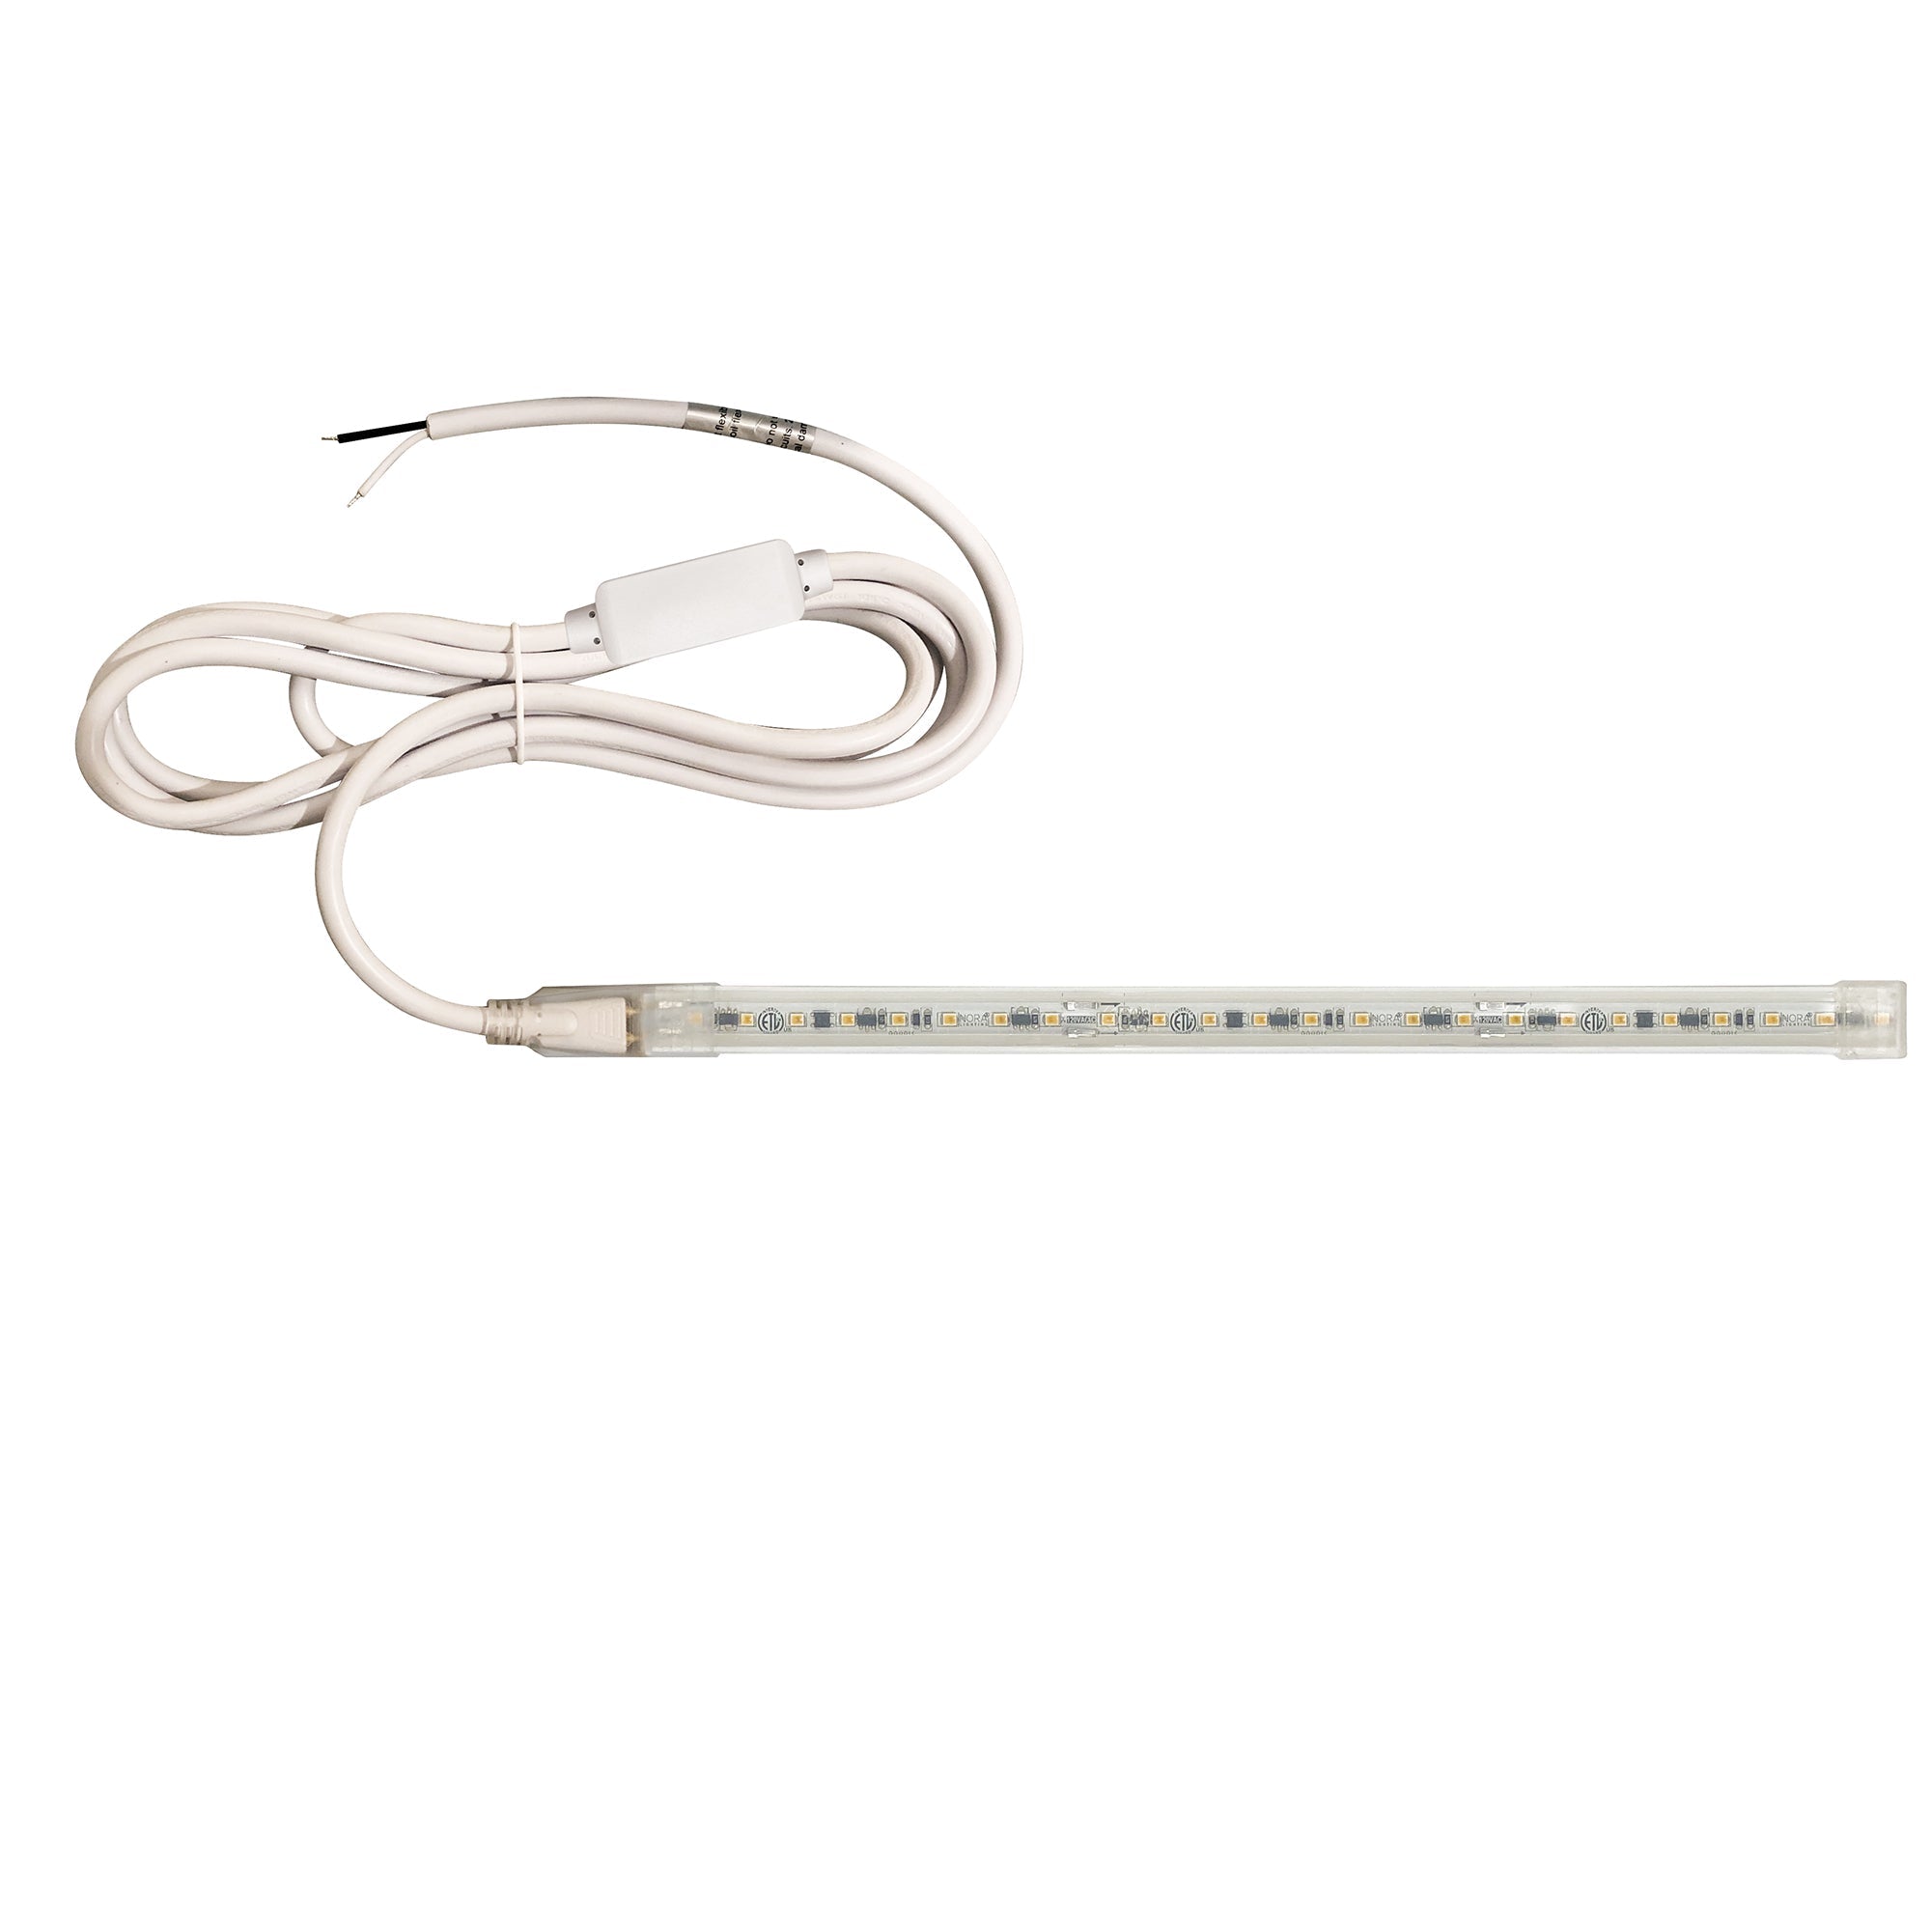 Nora Lighting NUTP13-W53-4-12-930/HWSP - Accent / Undercabinet - Custom Cut 53-ft, 4-in 120V Continuous LED Tape Light, 330lm / 3.6W per foot, 3000K, w/ Mounting Clips and 8' Hardwired Power Cord w/ Surge Protector